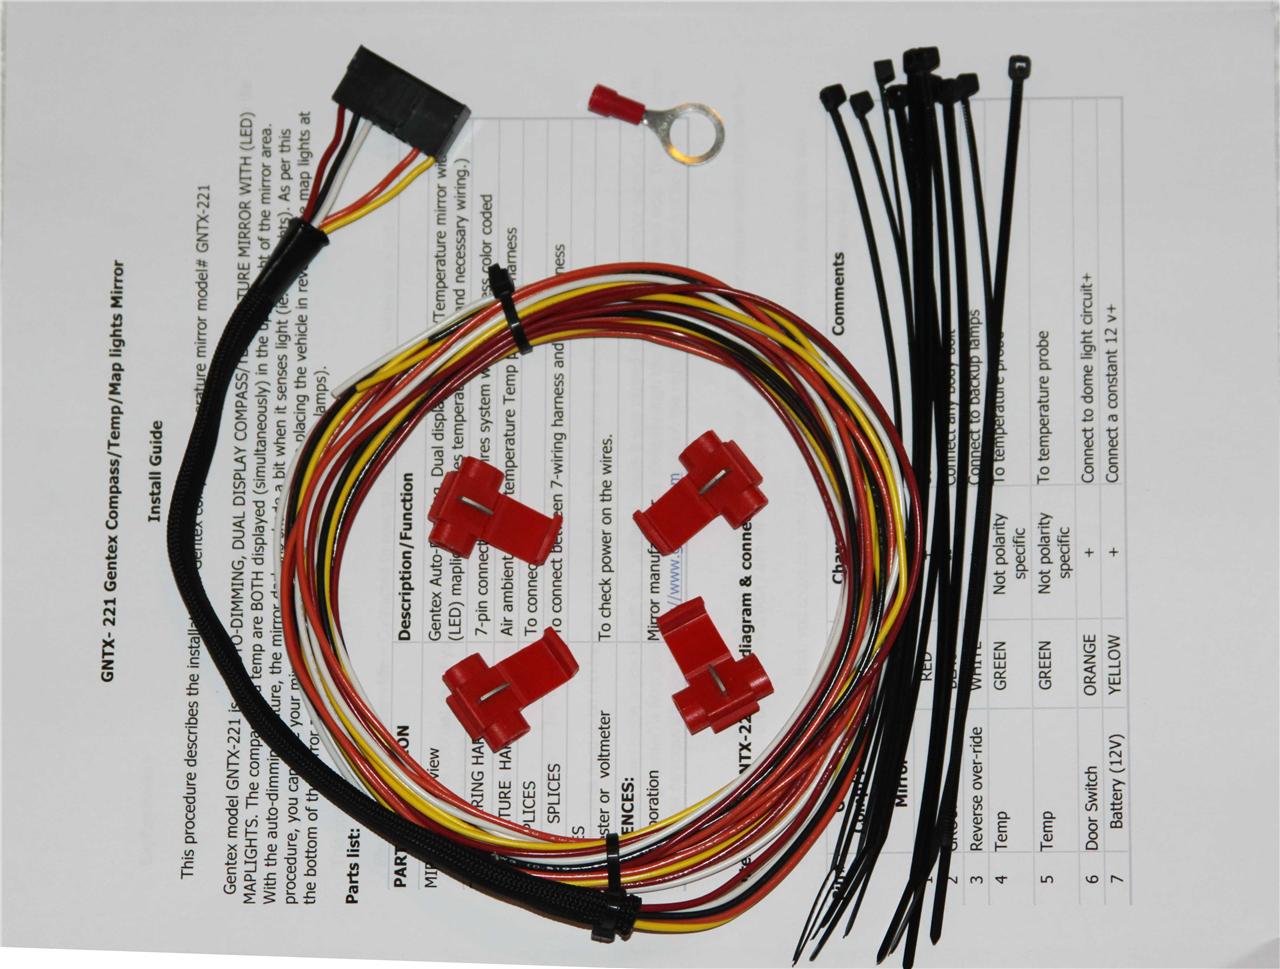 donnelly rear view mirror wiring diagram